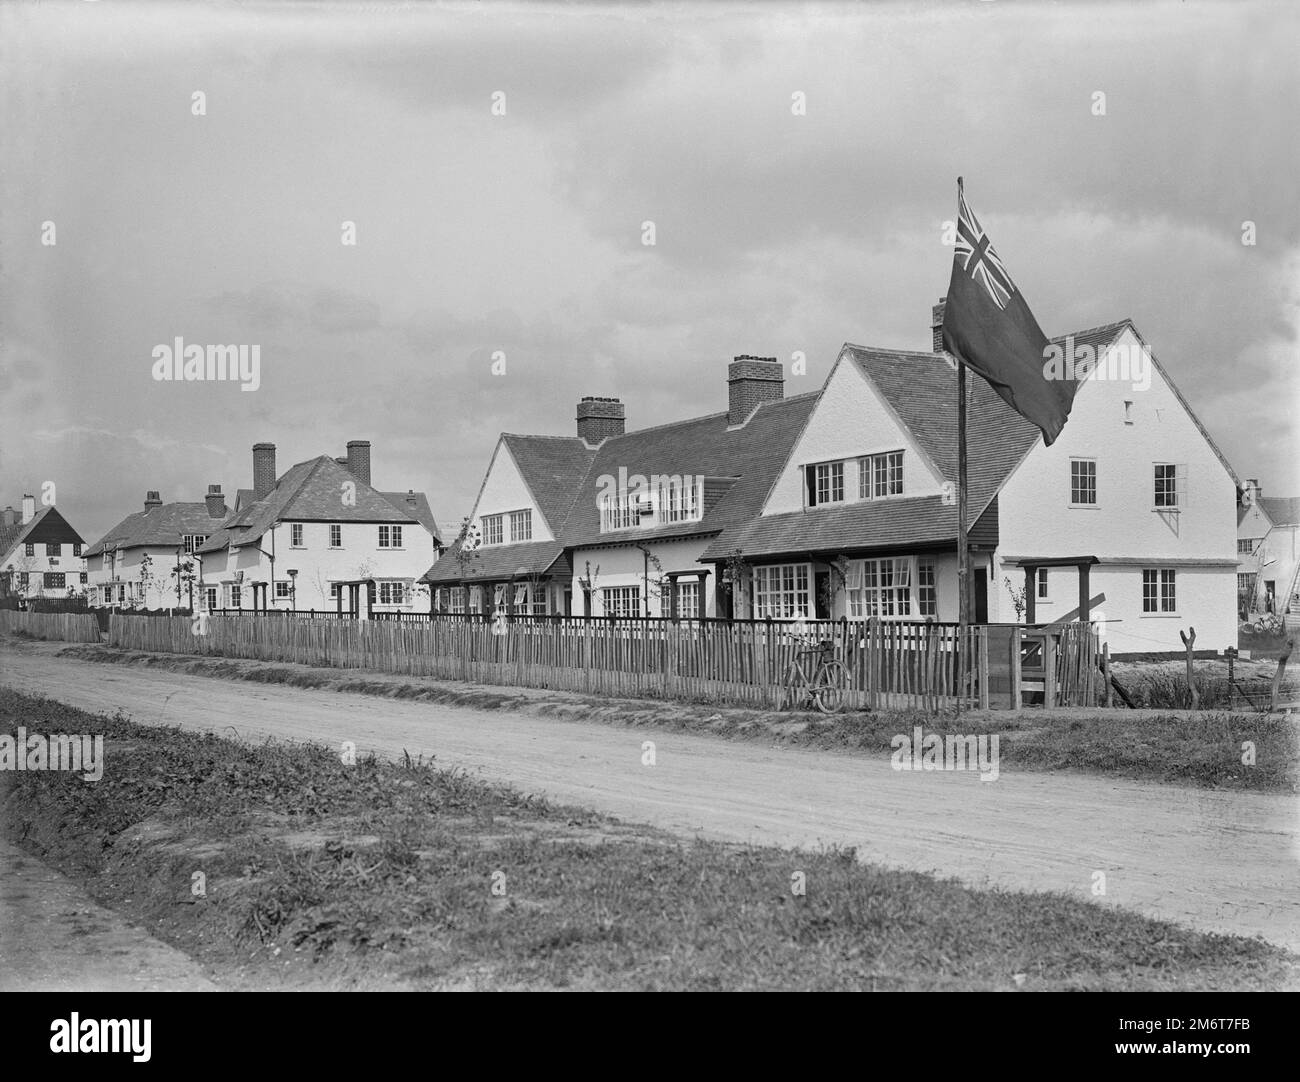 The Exhibition Buildings in Letchworth Garden City.  Described as 'an Exhibition of Urban Cottages and Town Planning, Small Holding Cottages and Homesteads, Building Accessories, Plans and Models.'  Digitised archive copy of an original quarter-plate glass negative of August 1907. Stock Photo